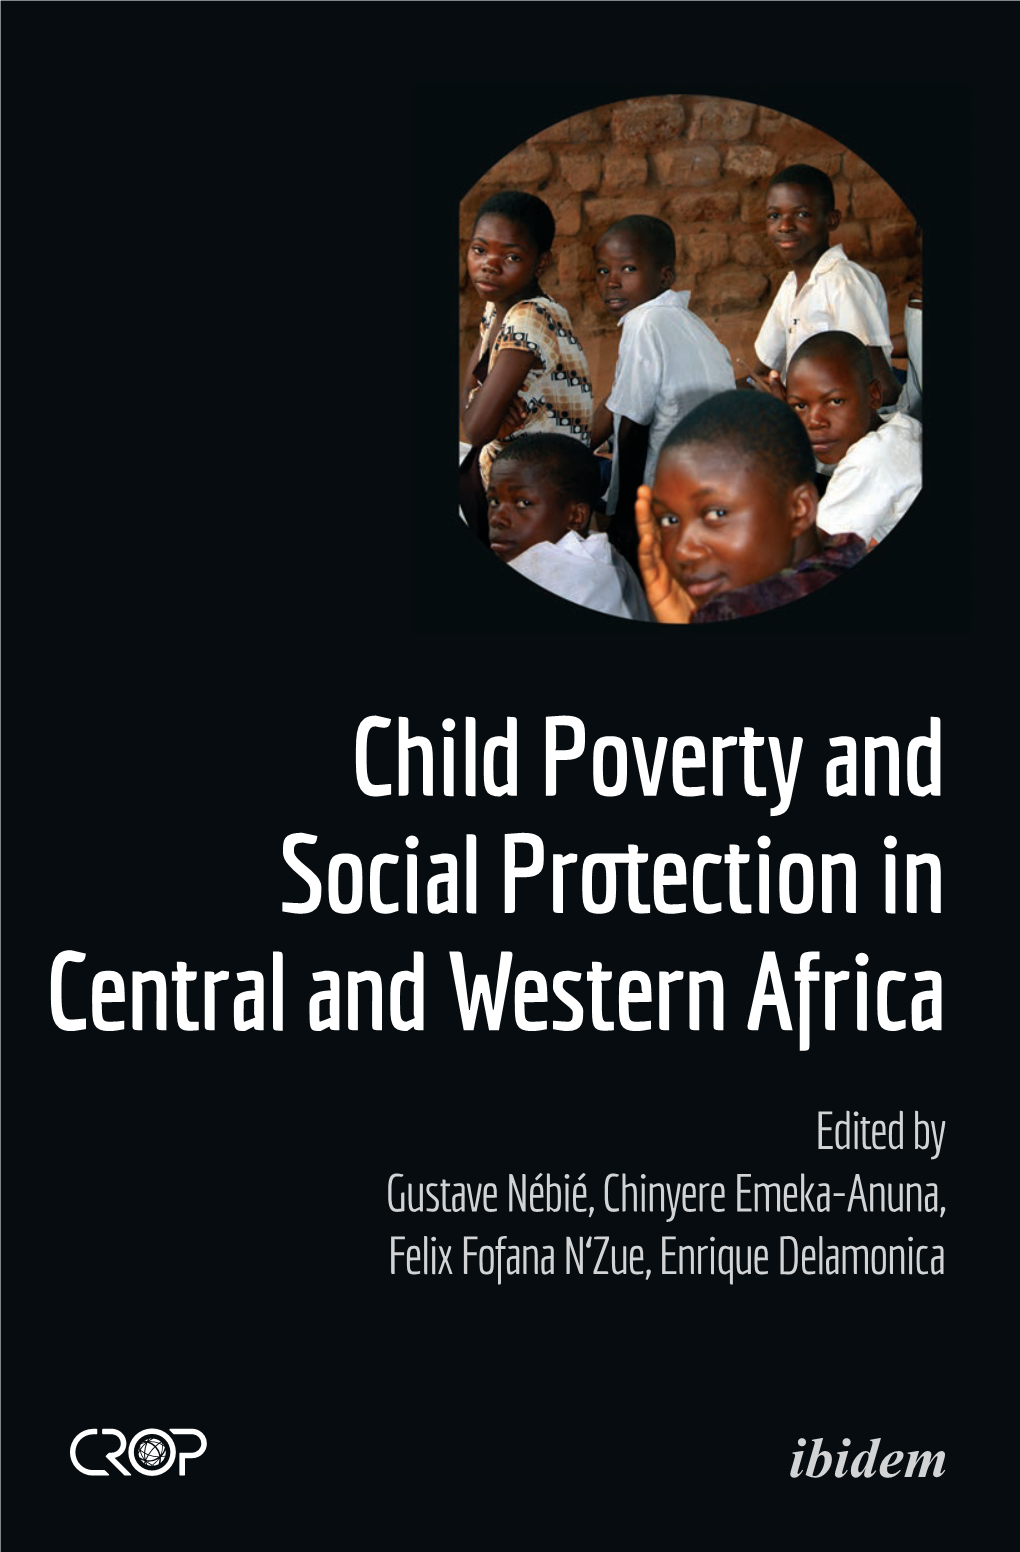 Child Poverty and Social Protection in Central and Western Africa CROP International Poverty Studies